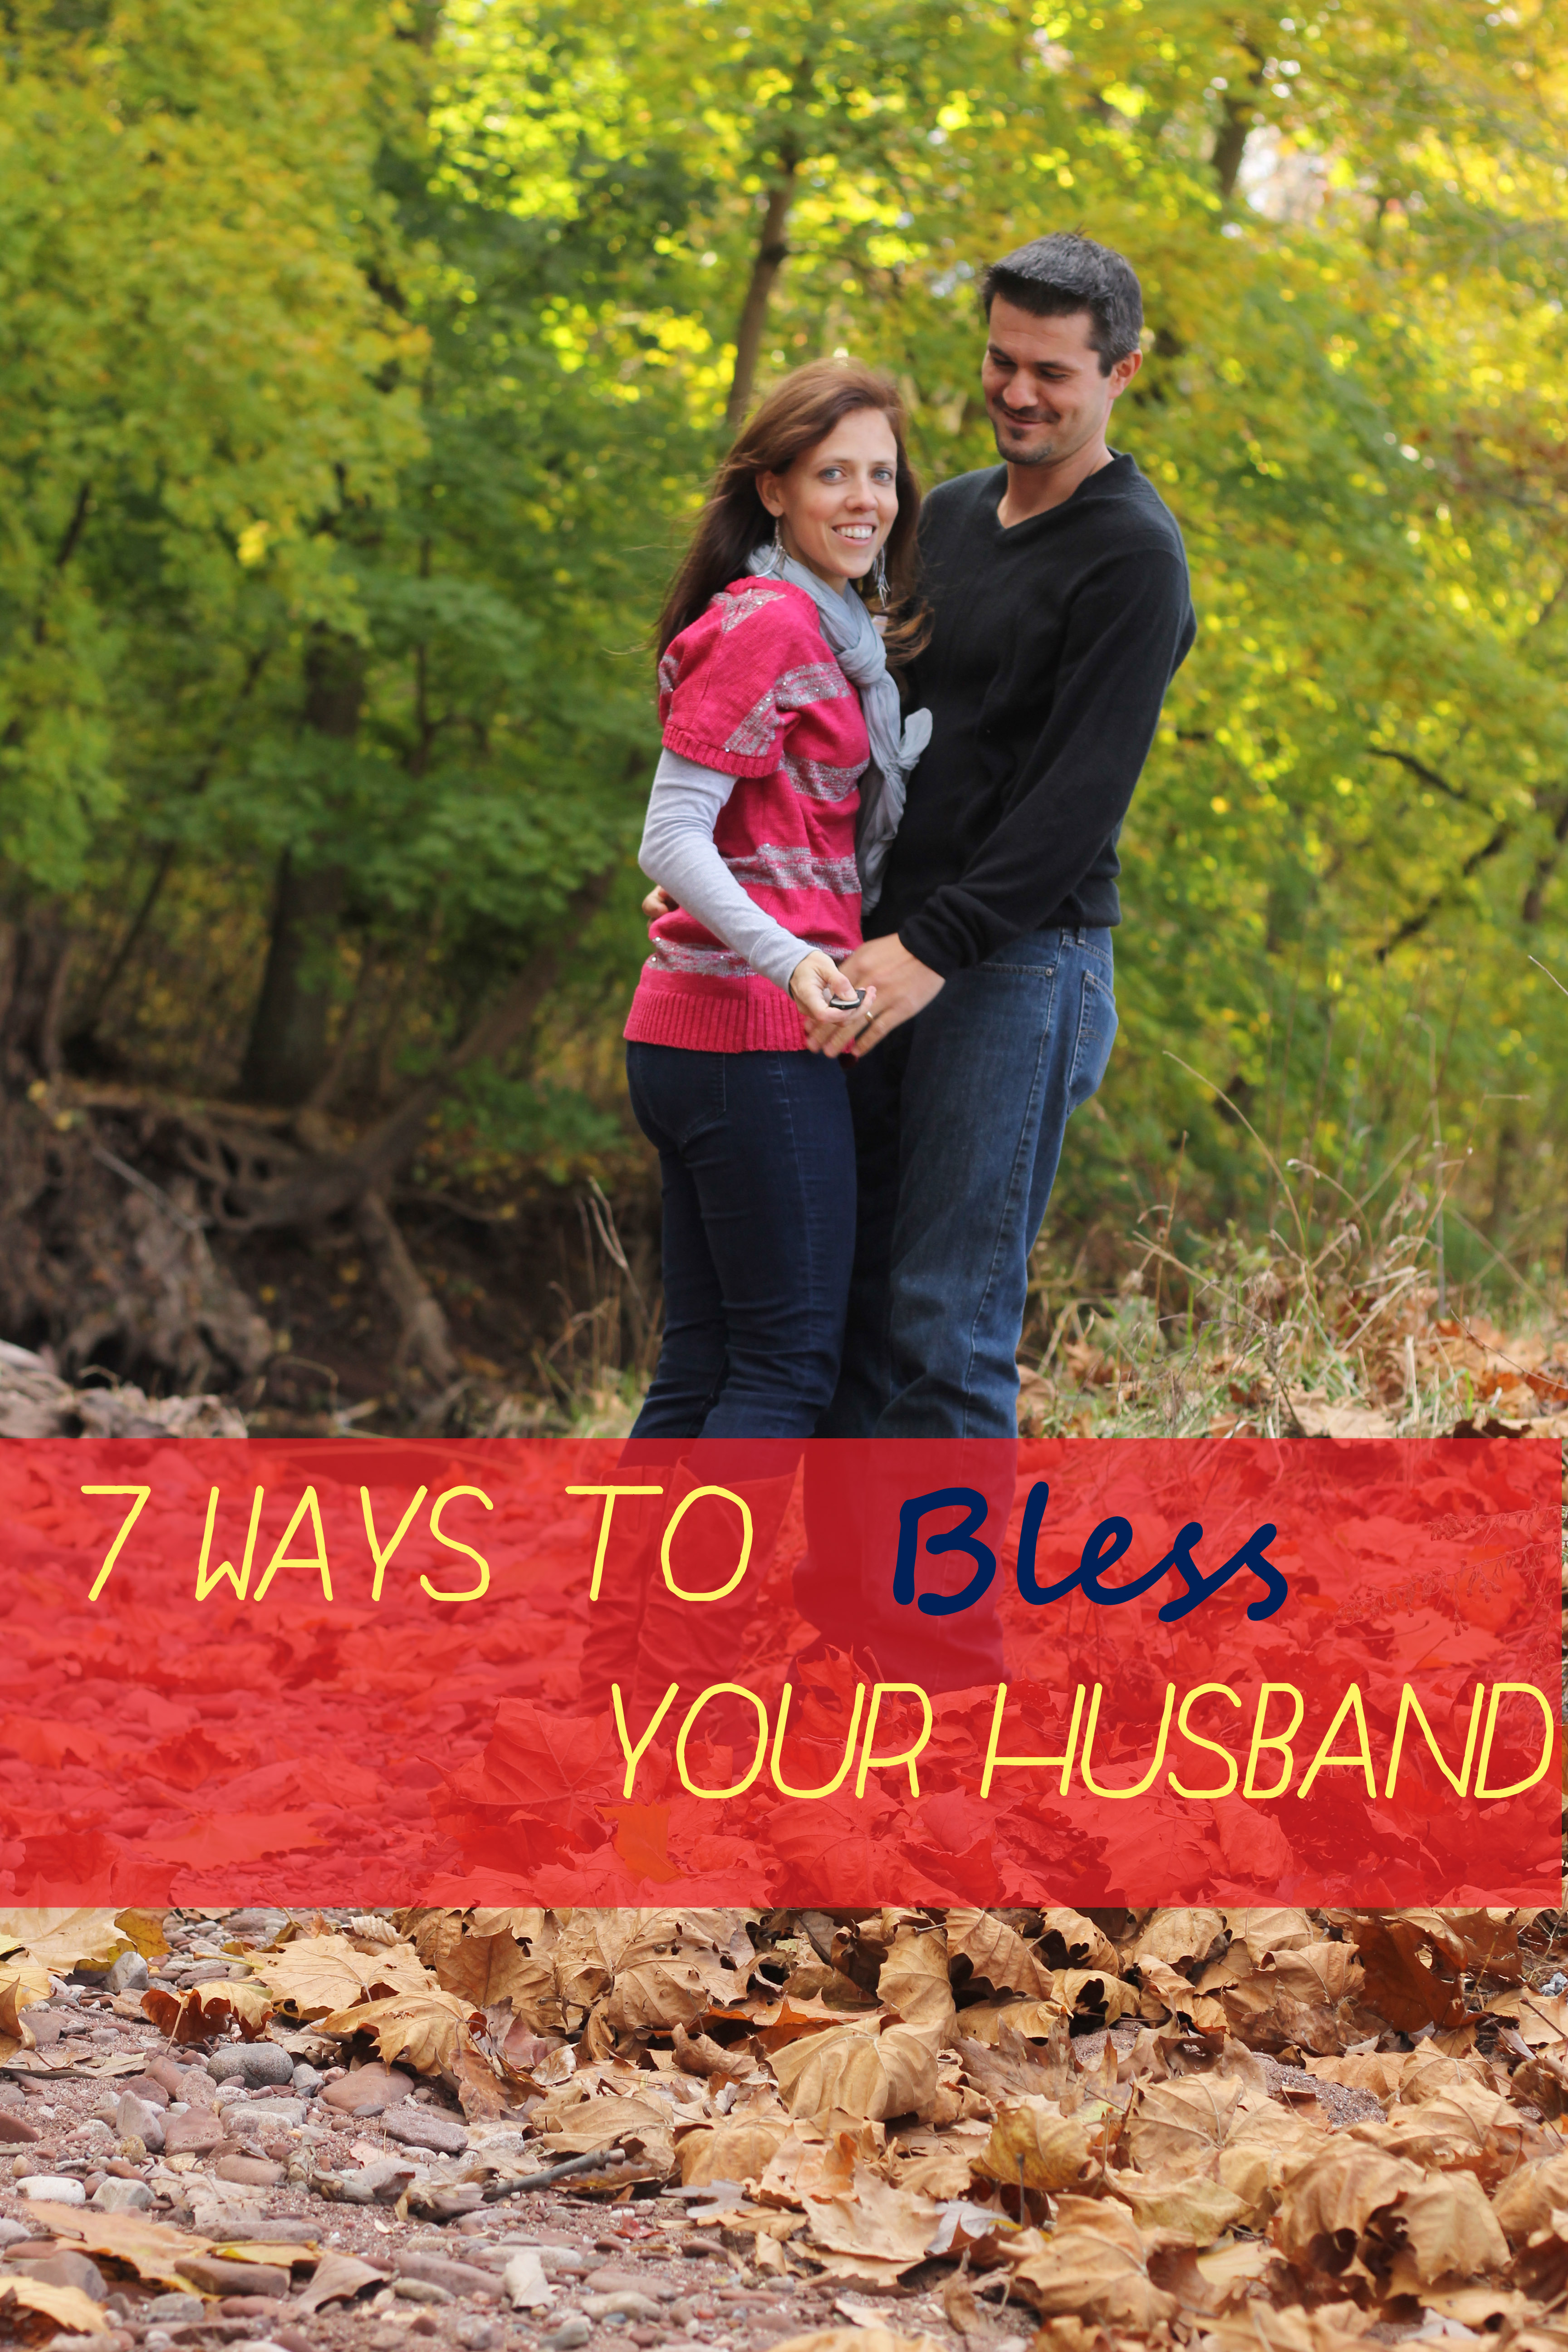 7 Ways to Bless Your Husband